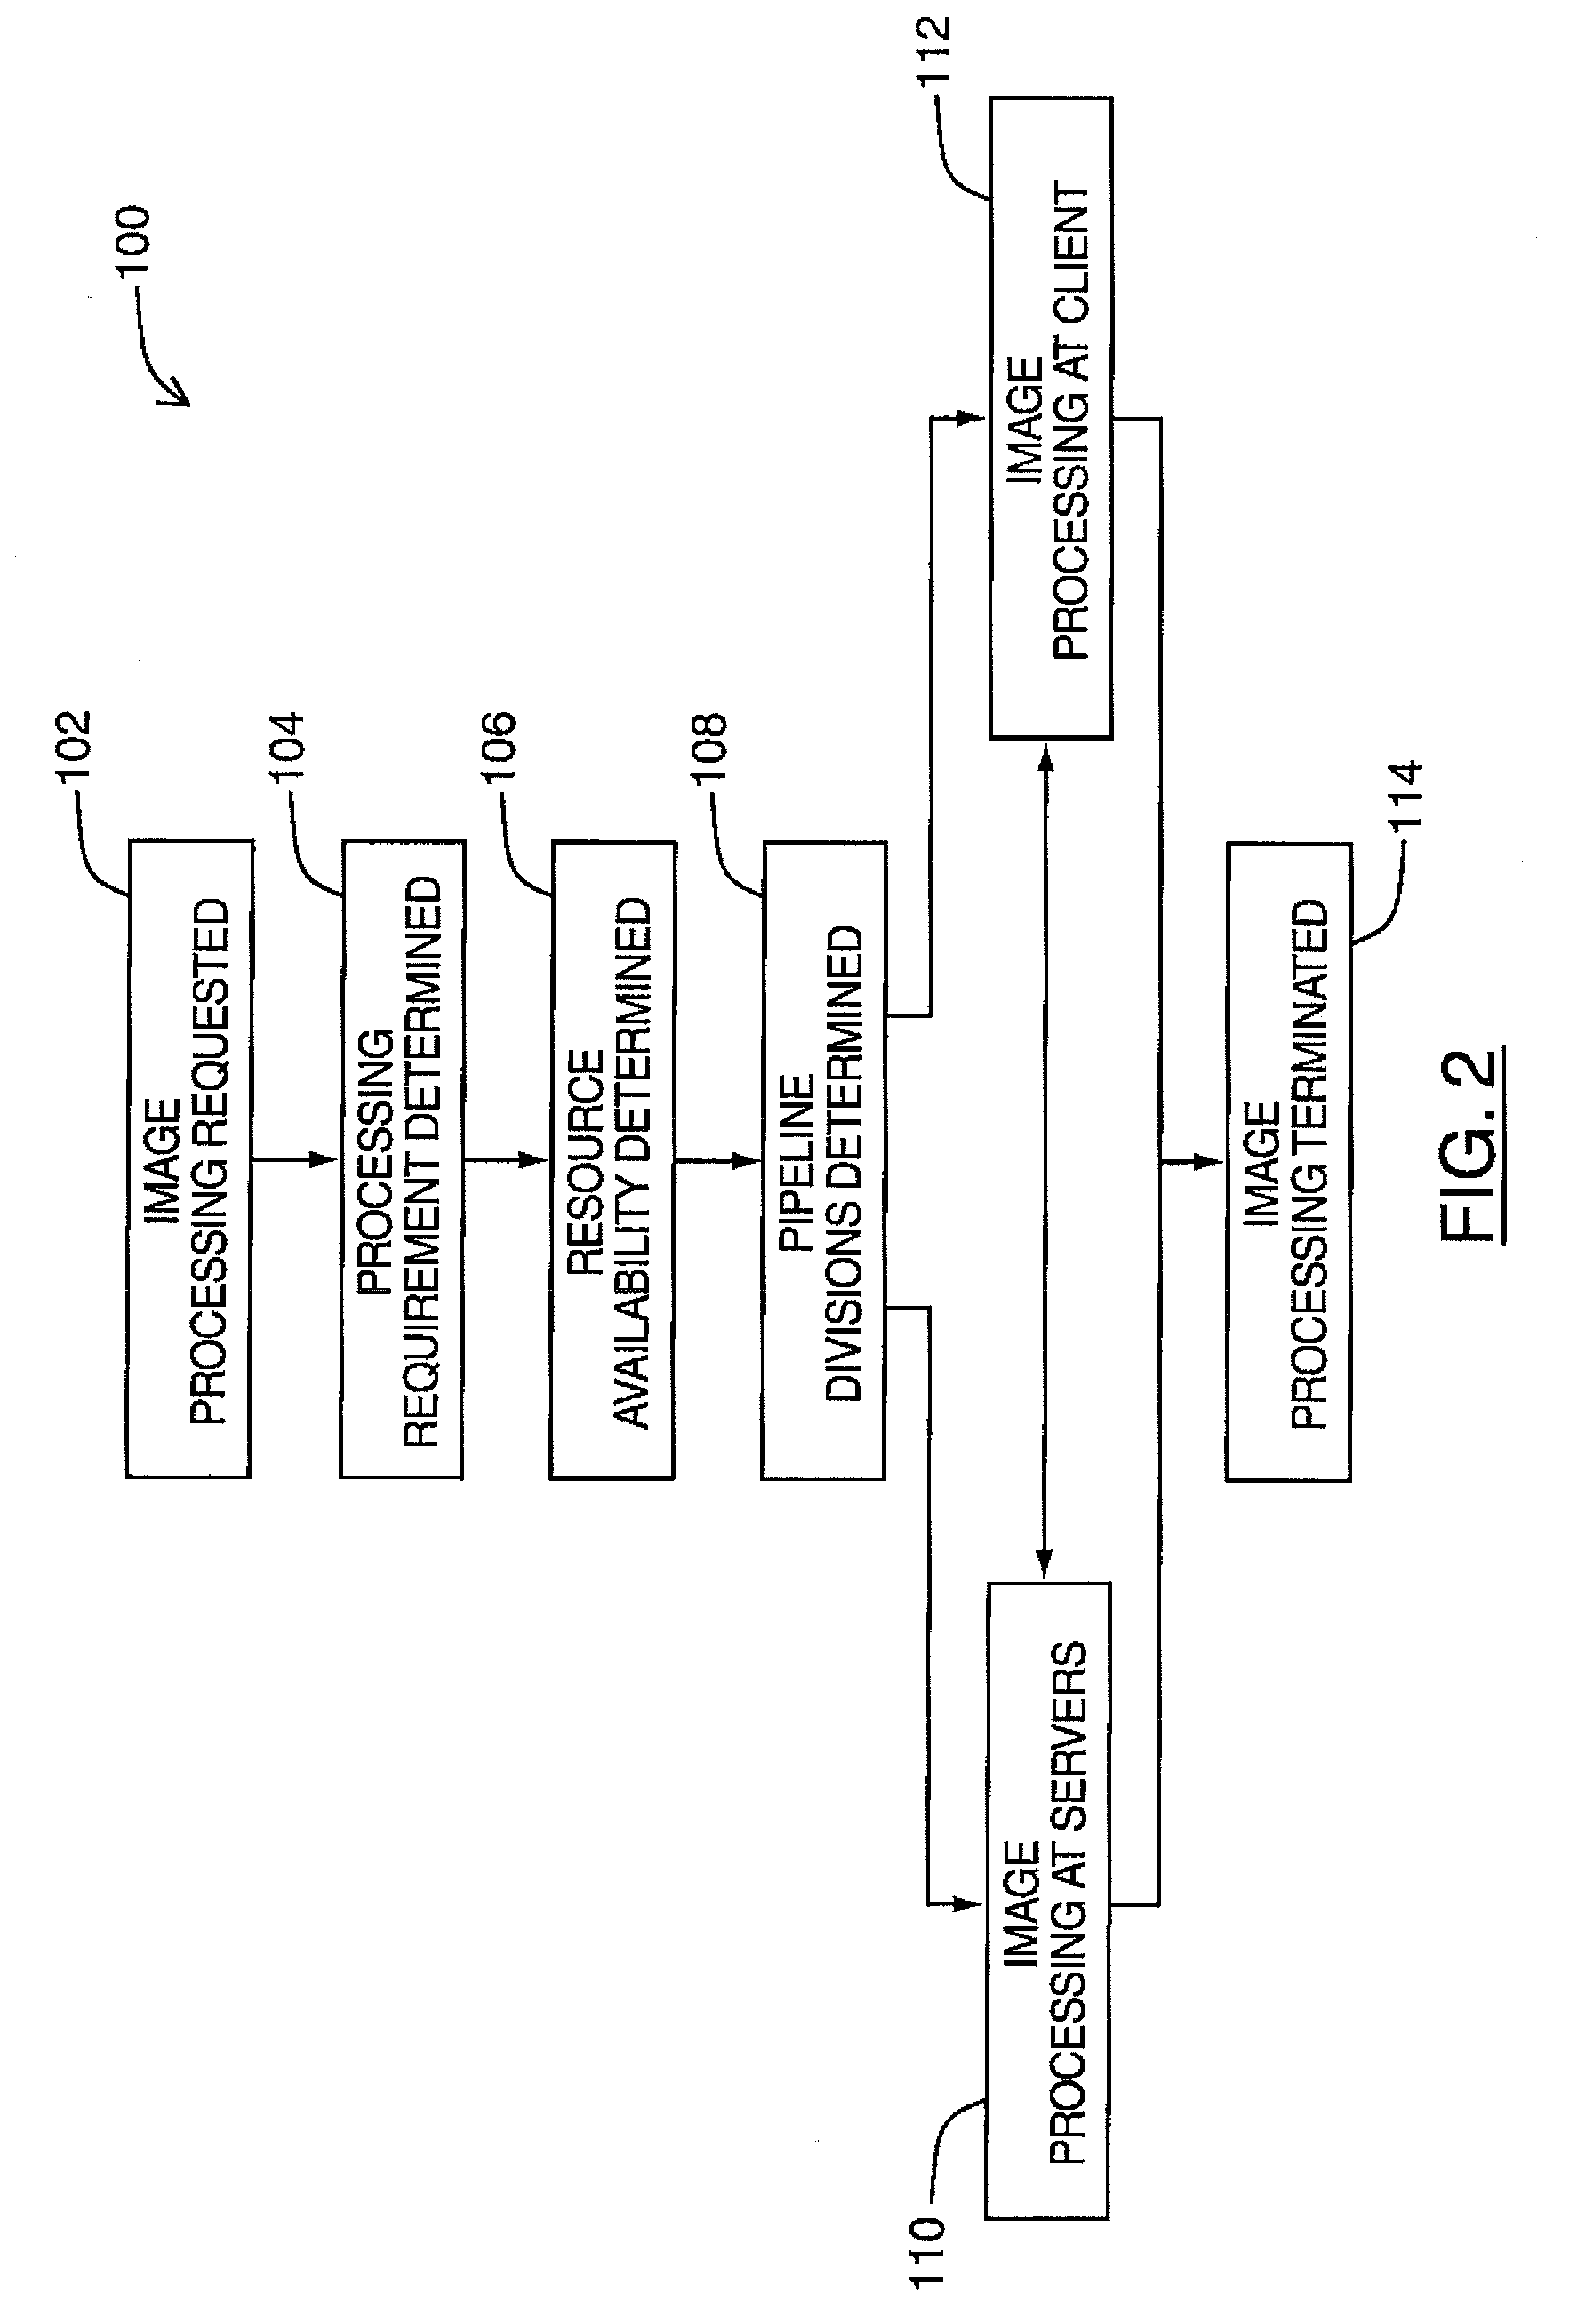 Method and System for Dynamic Image Processing